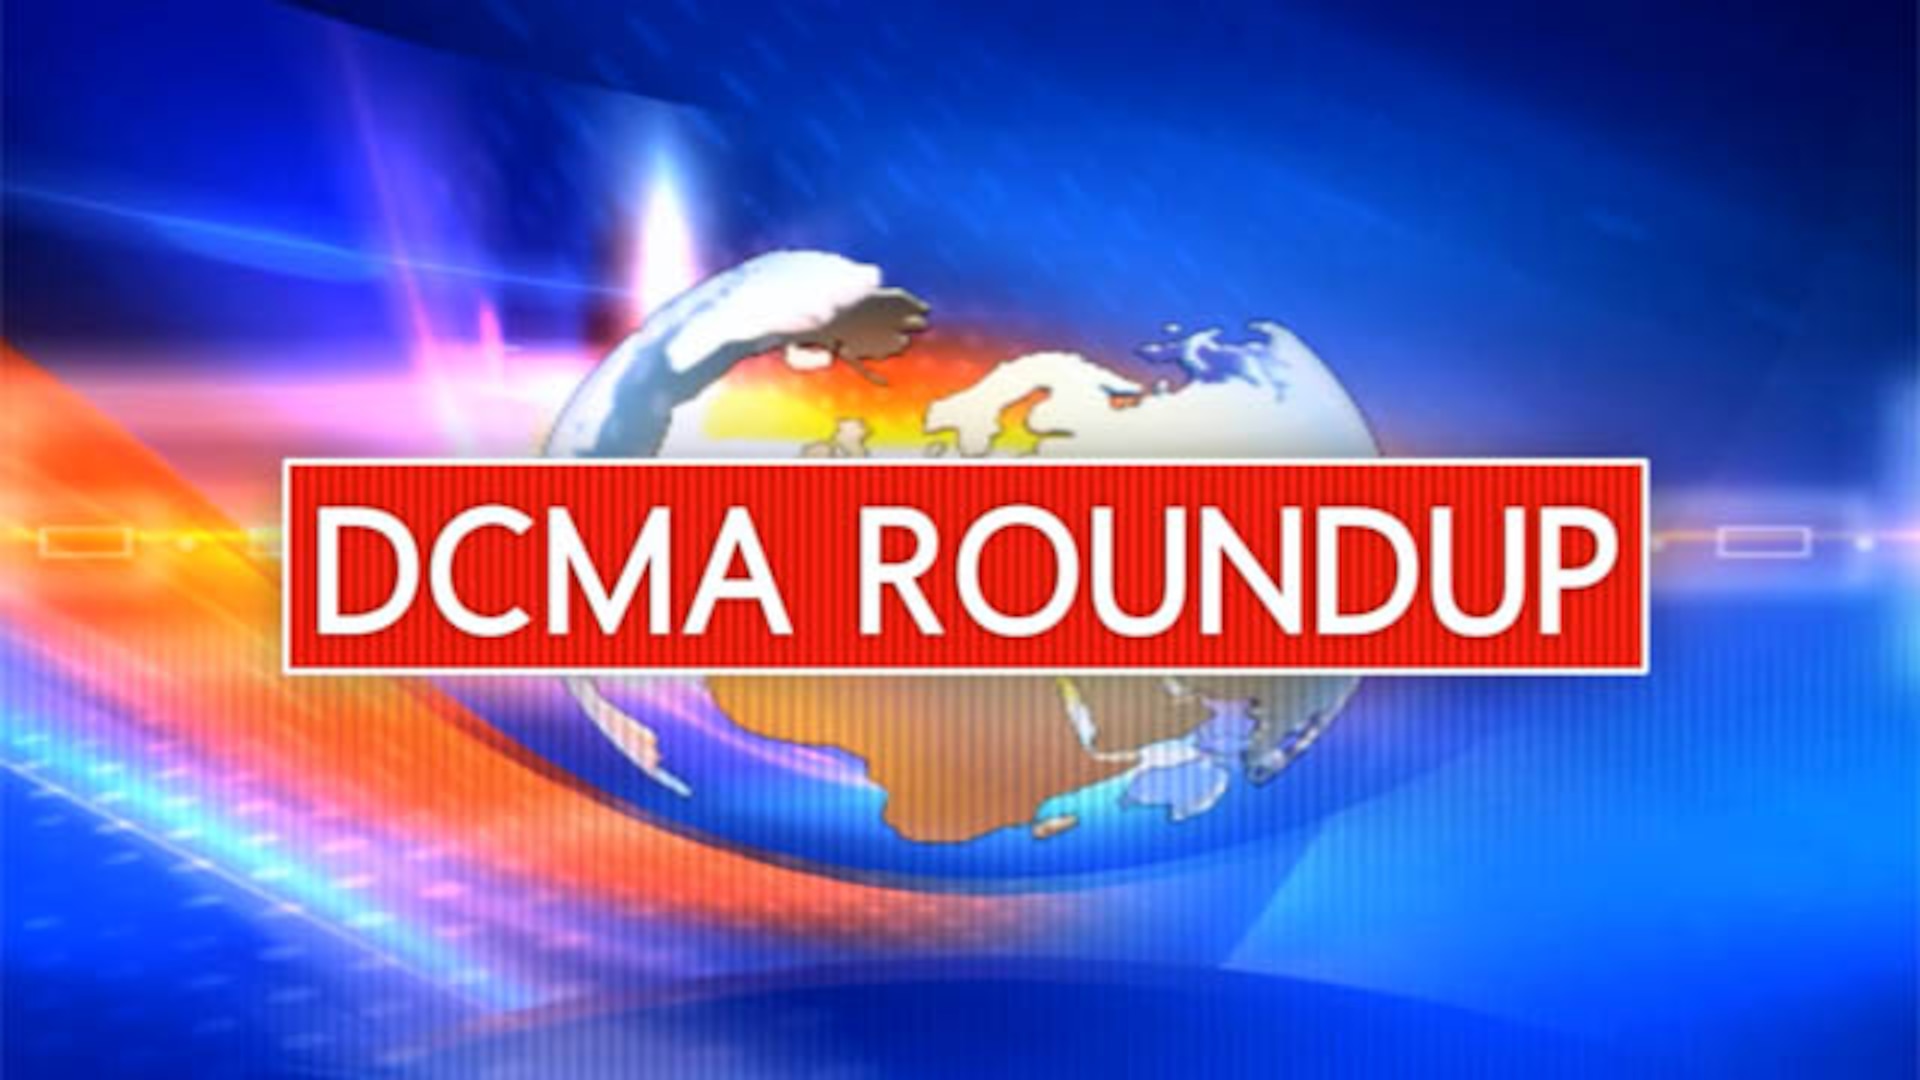 DCMA's Roundup program highlights news stories from across the agency's global network of acquisition professionals.